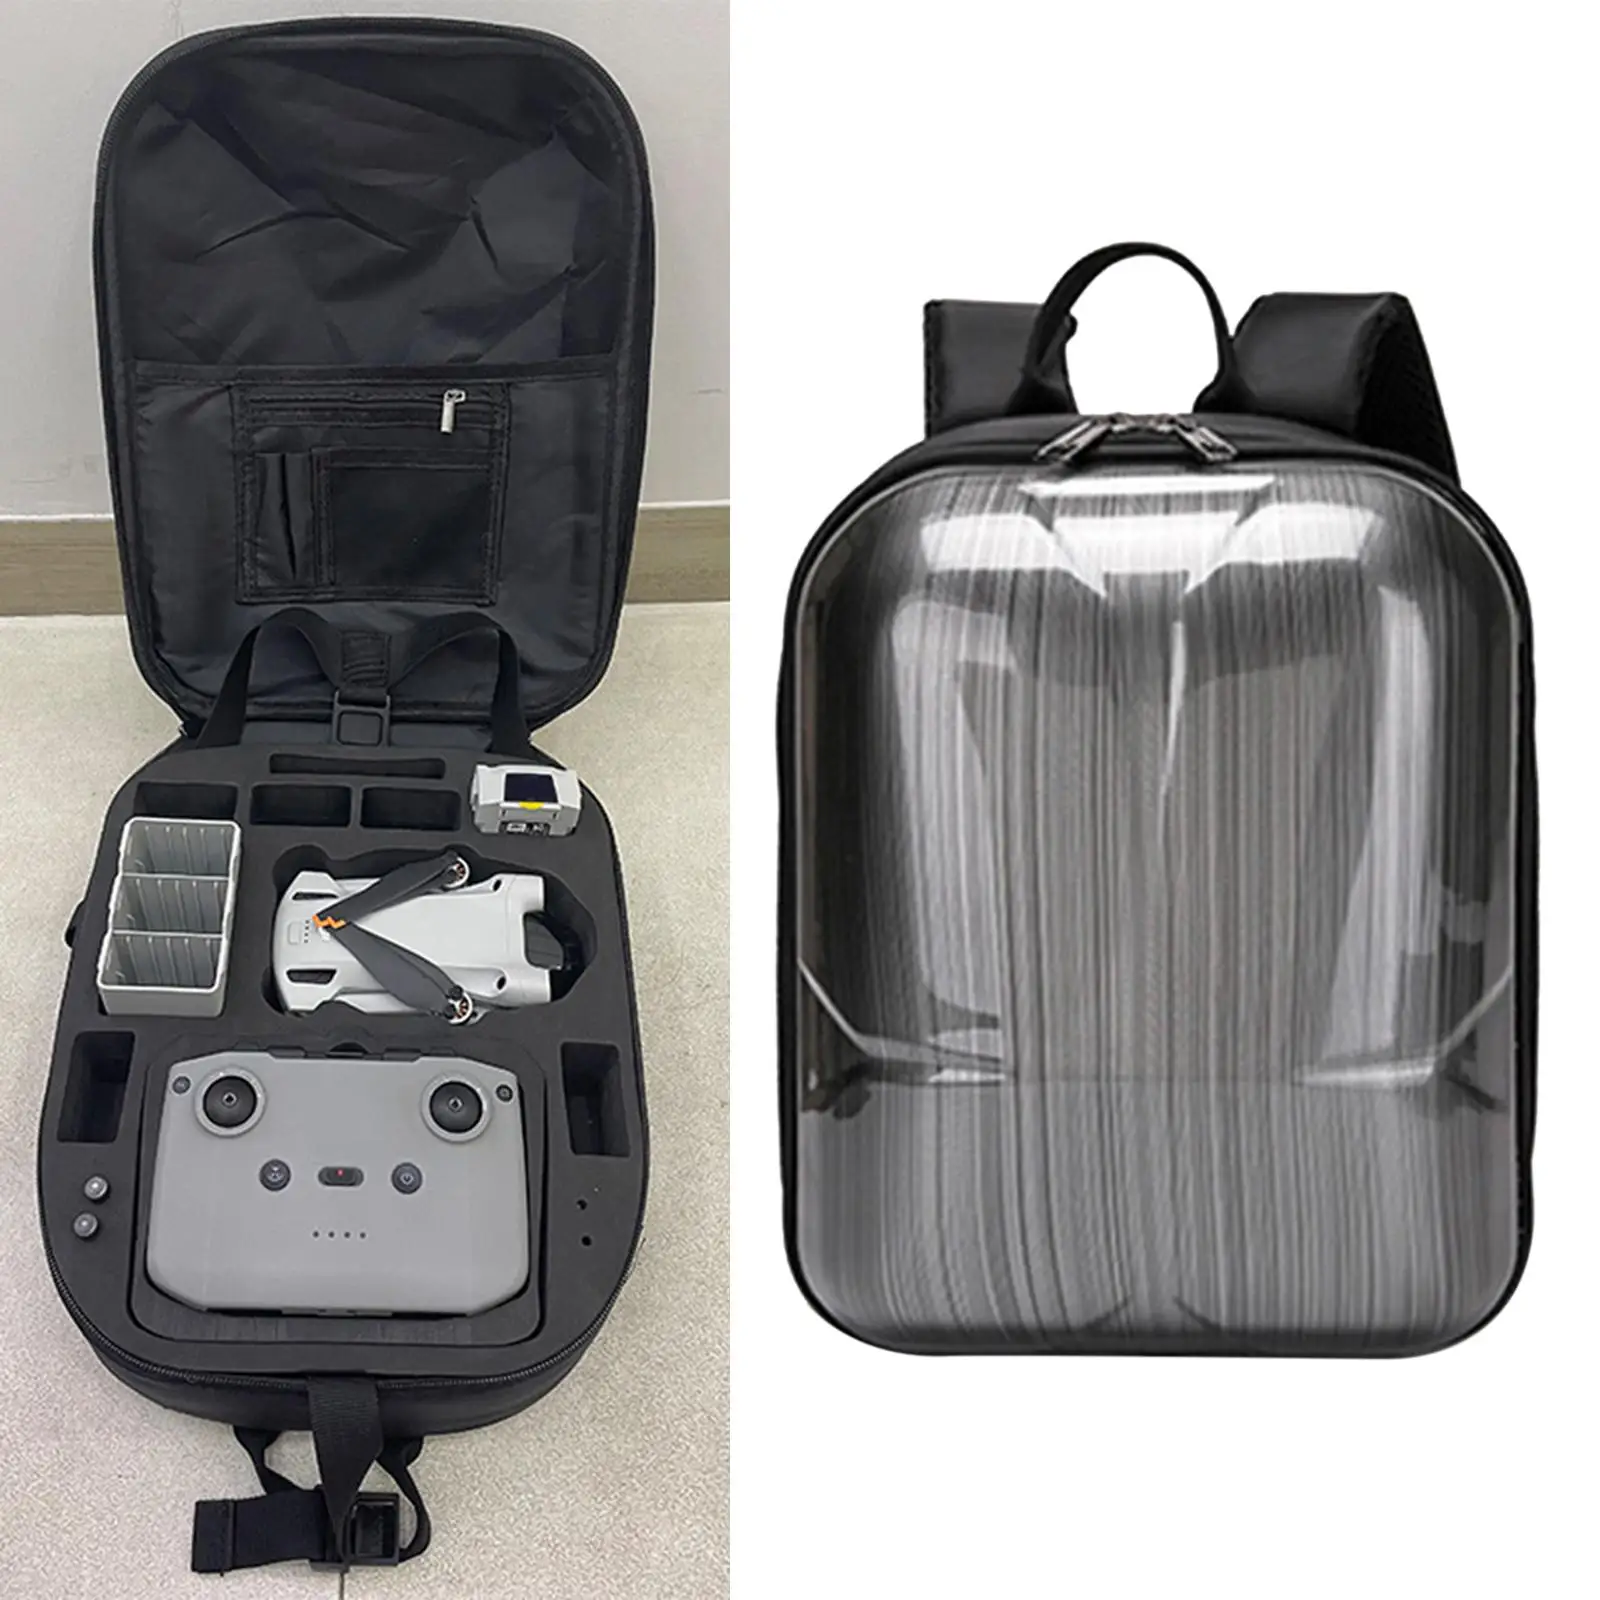 Portable Travel Carry Case Backpack Storage Bag Shockproof Waterproof EVA for DJI Mini 3 Pro Drone Quadcopter and Accessories